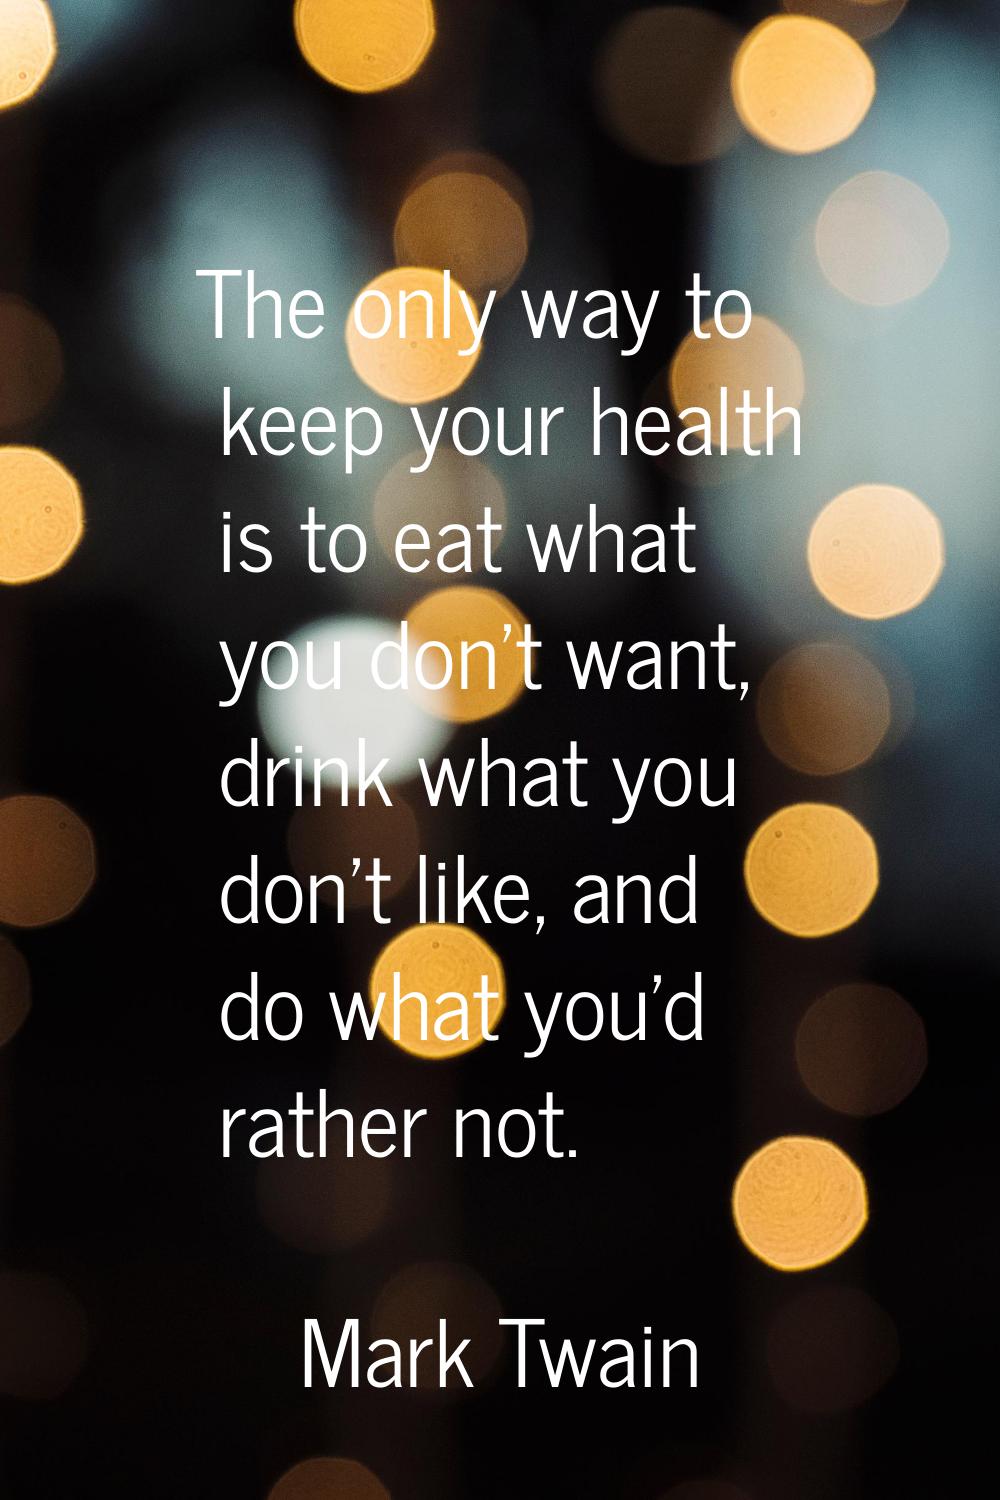 The only way to keep your health is to eat what you don't want, drink what you don't like, and do w